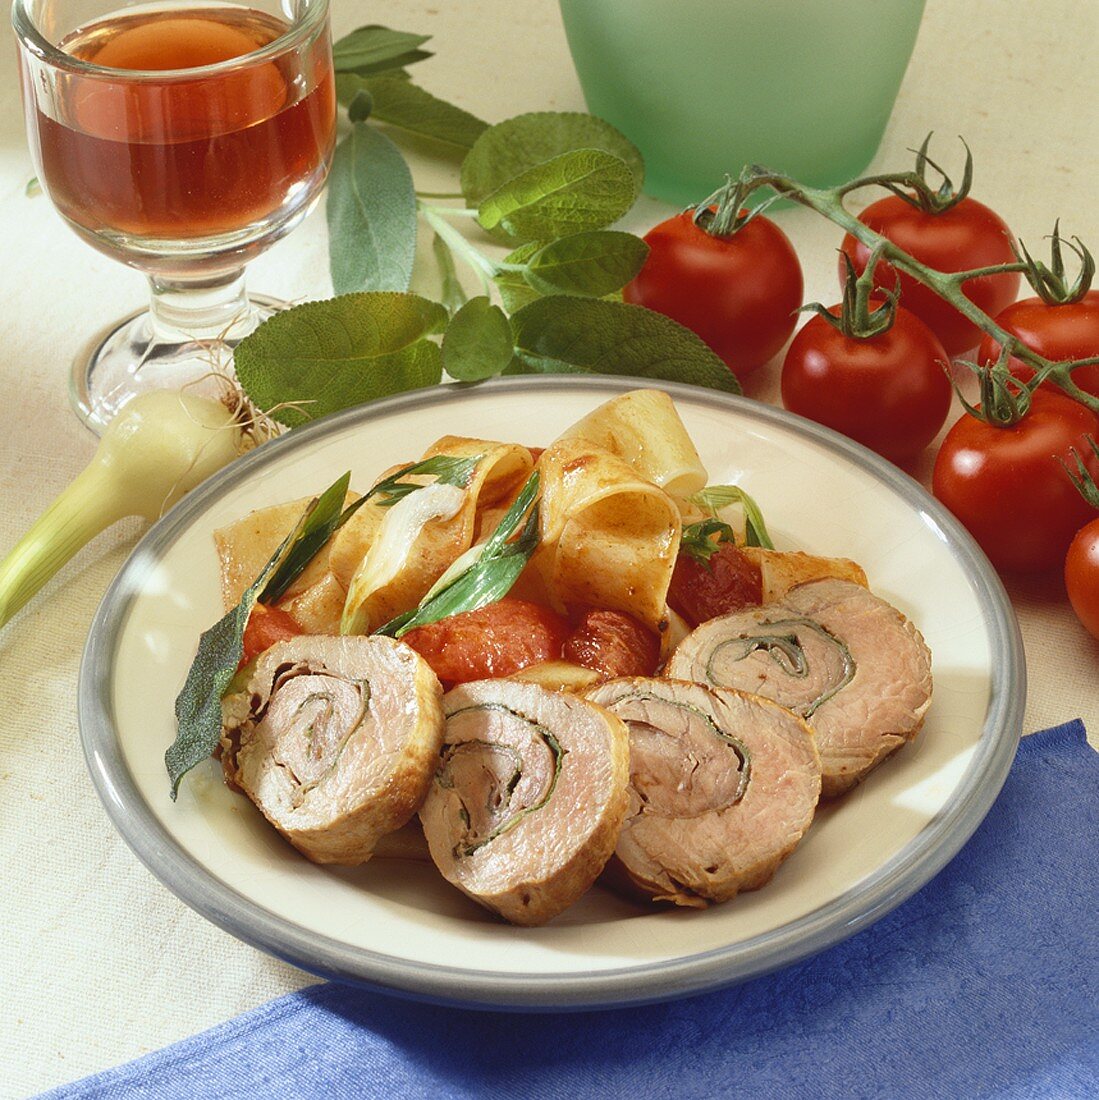 Stuffed pork roulades with tomatoes and broad ribbon pasta